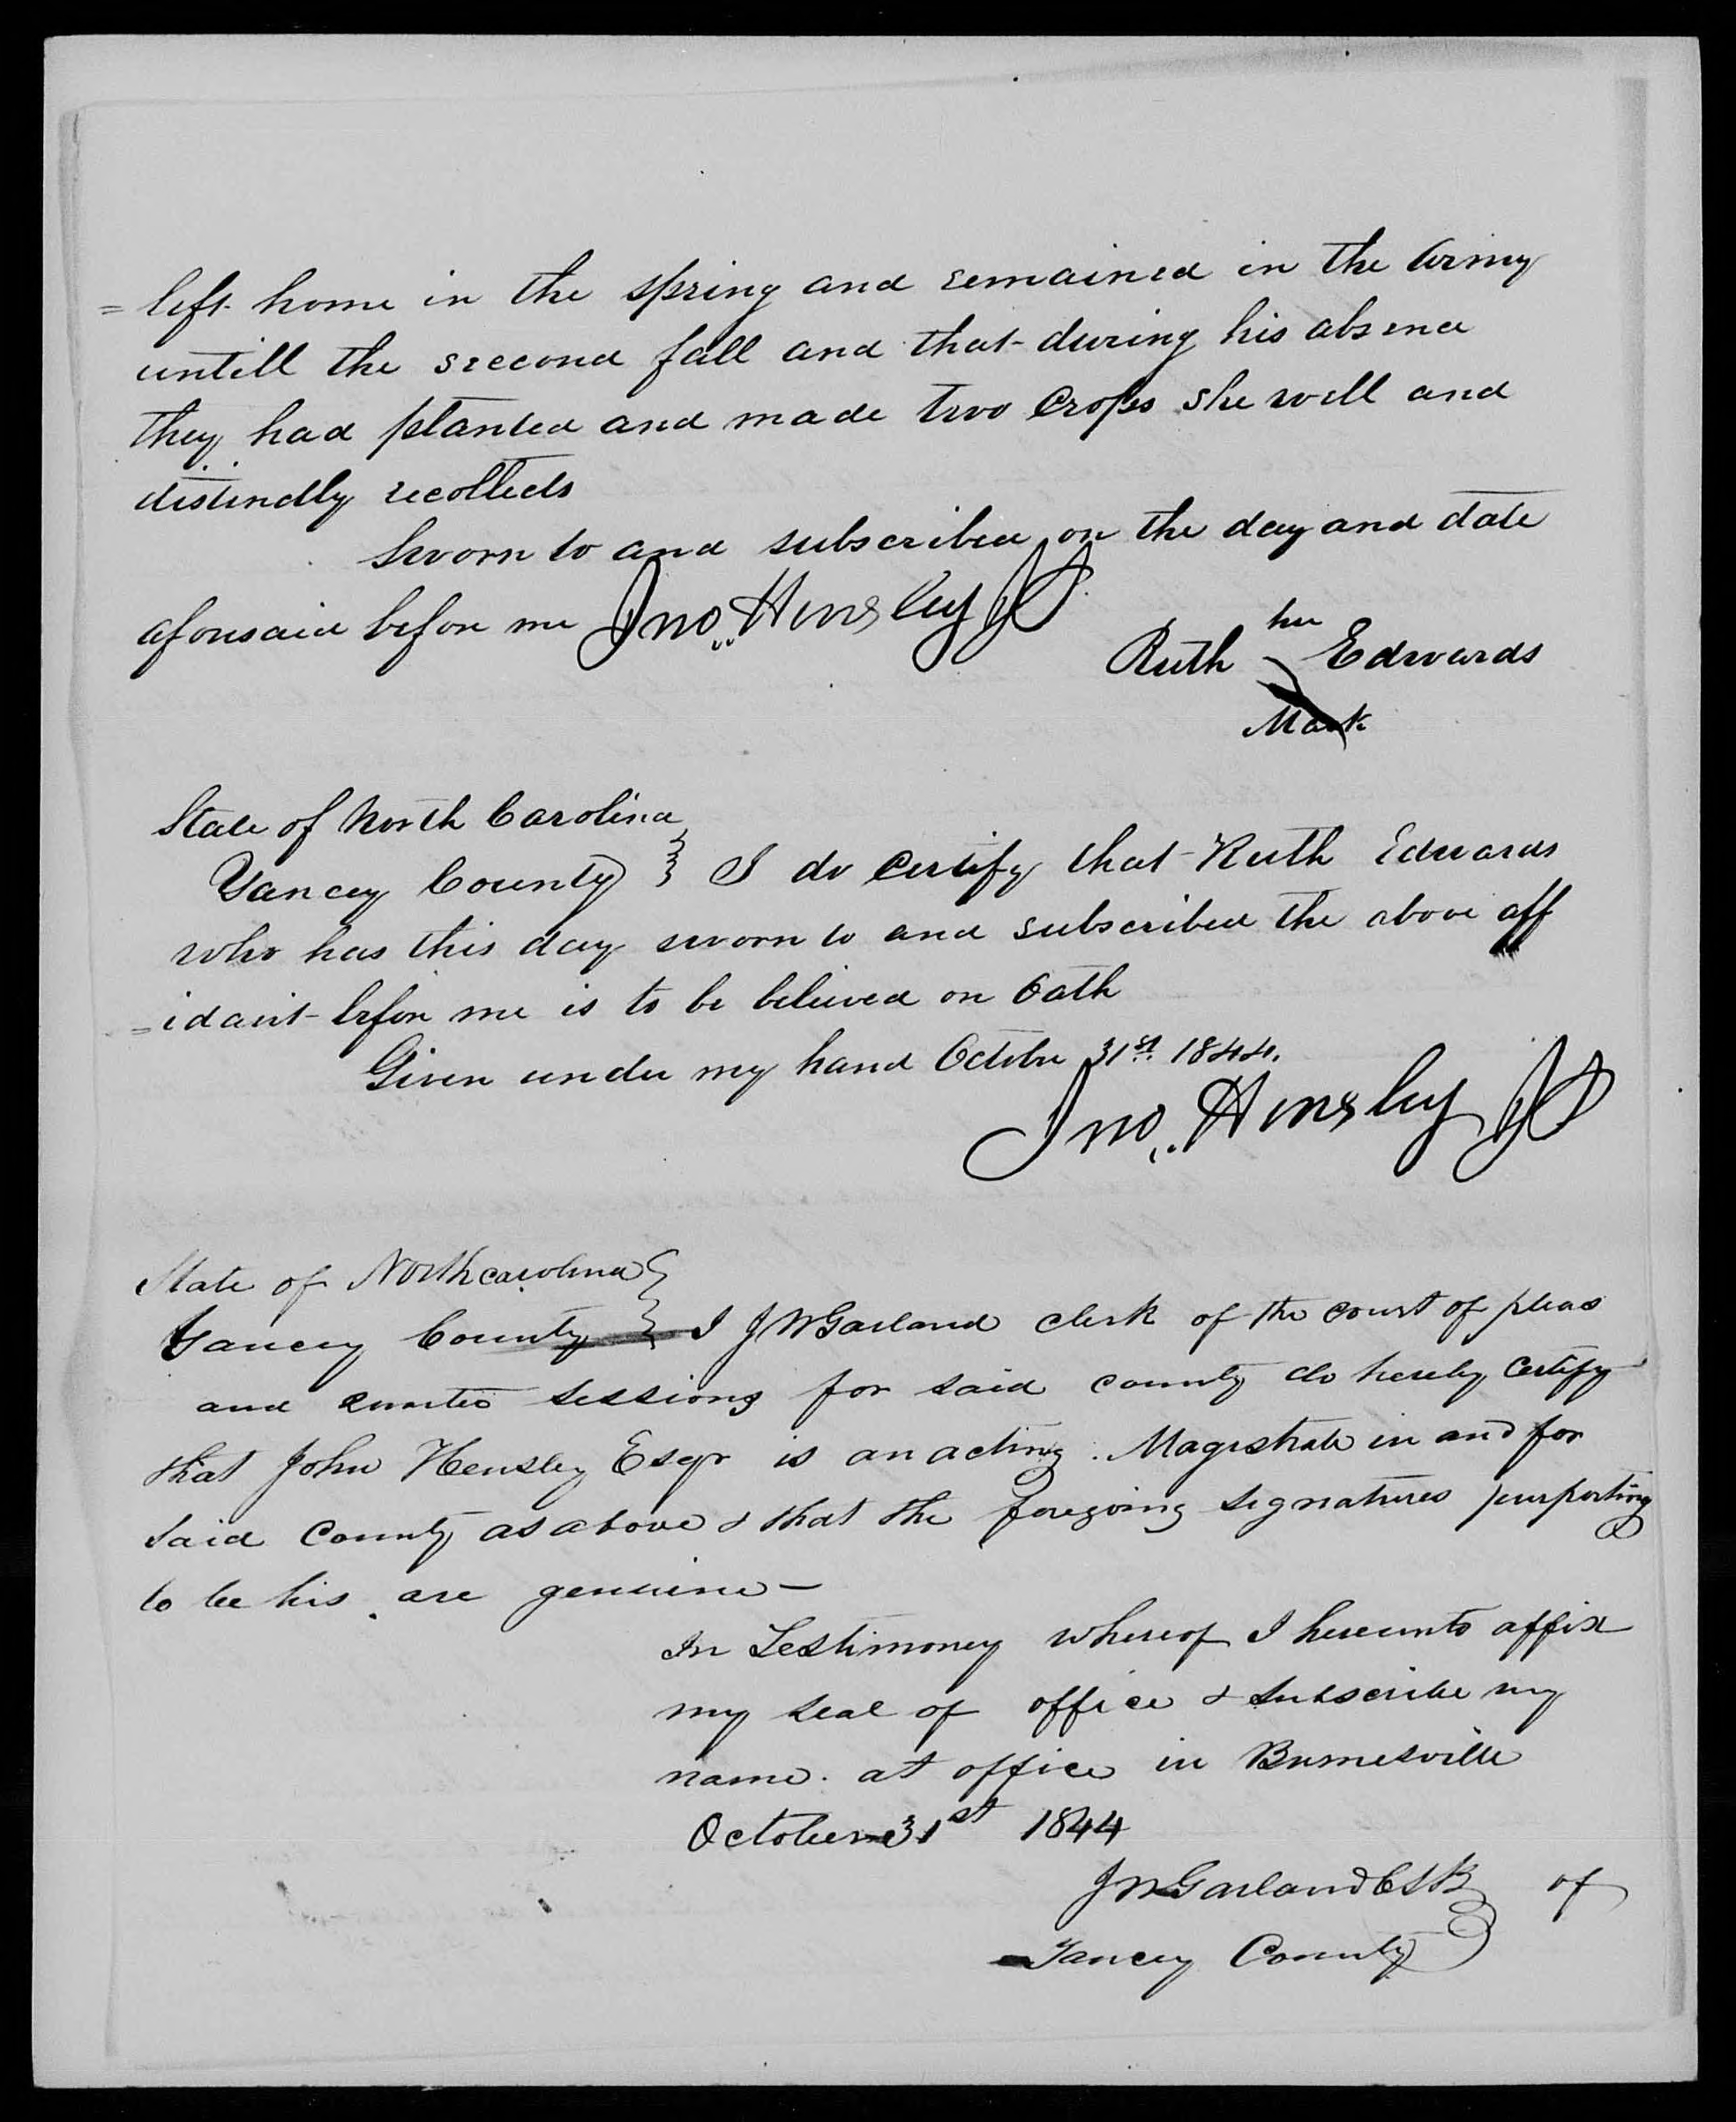  Application for a Widow's Pension from Ruth Edwards, 31 October 1844, page 2